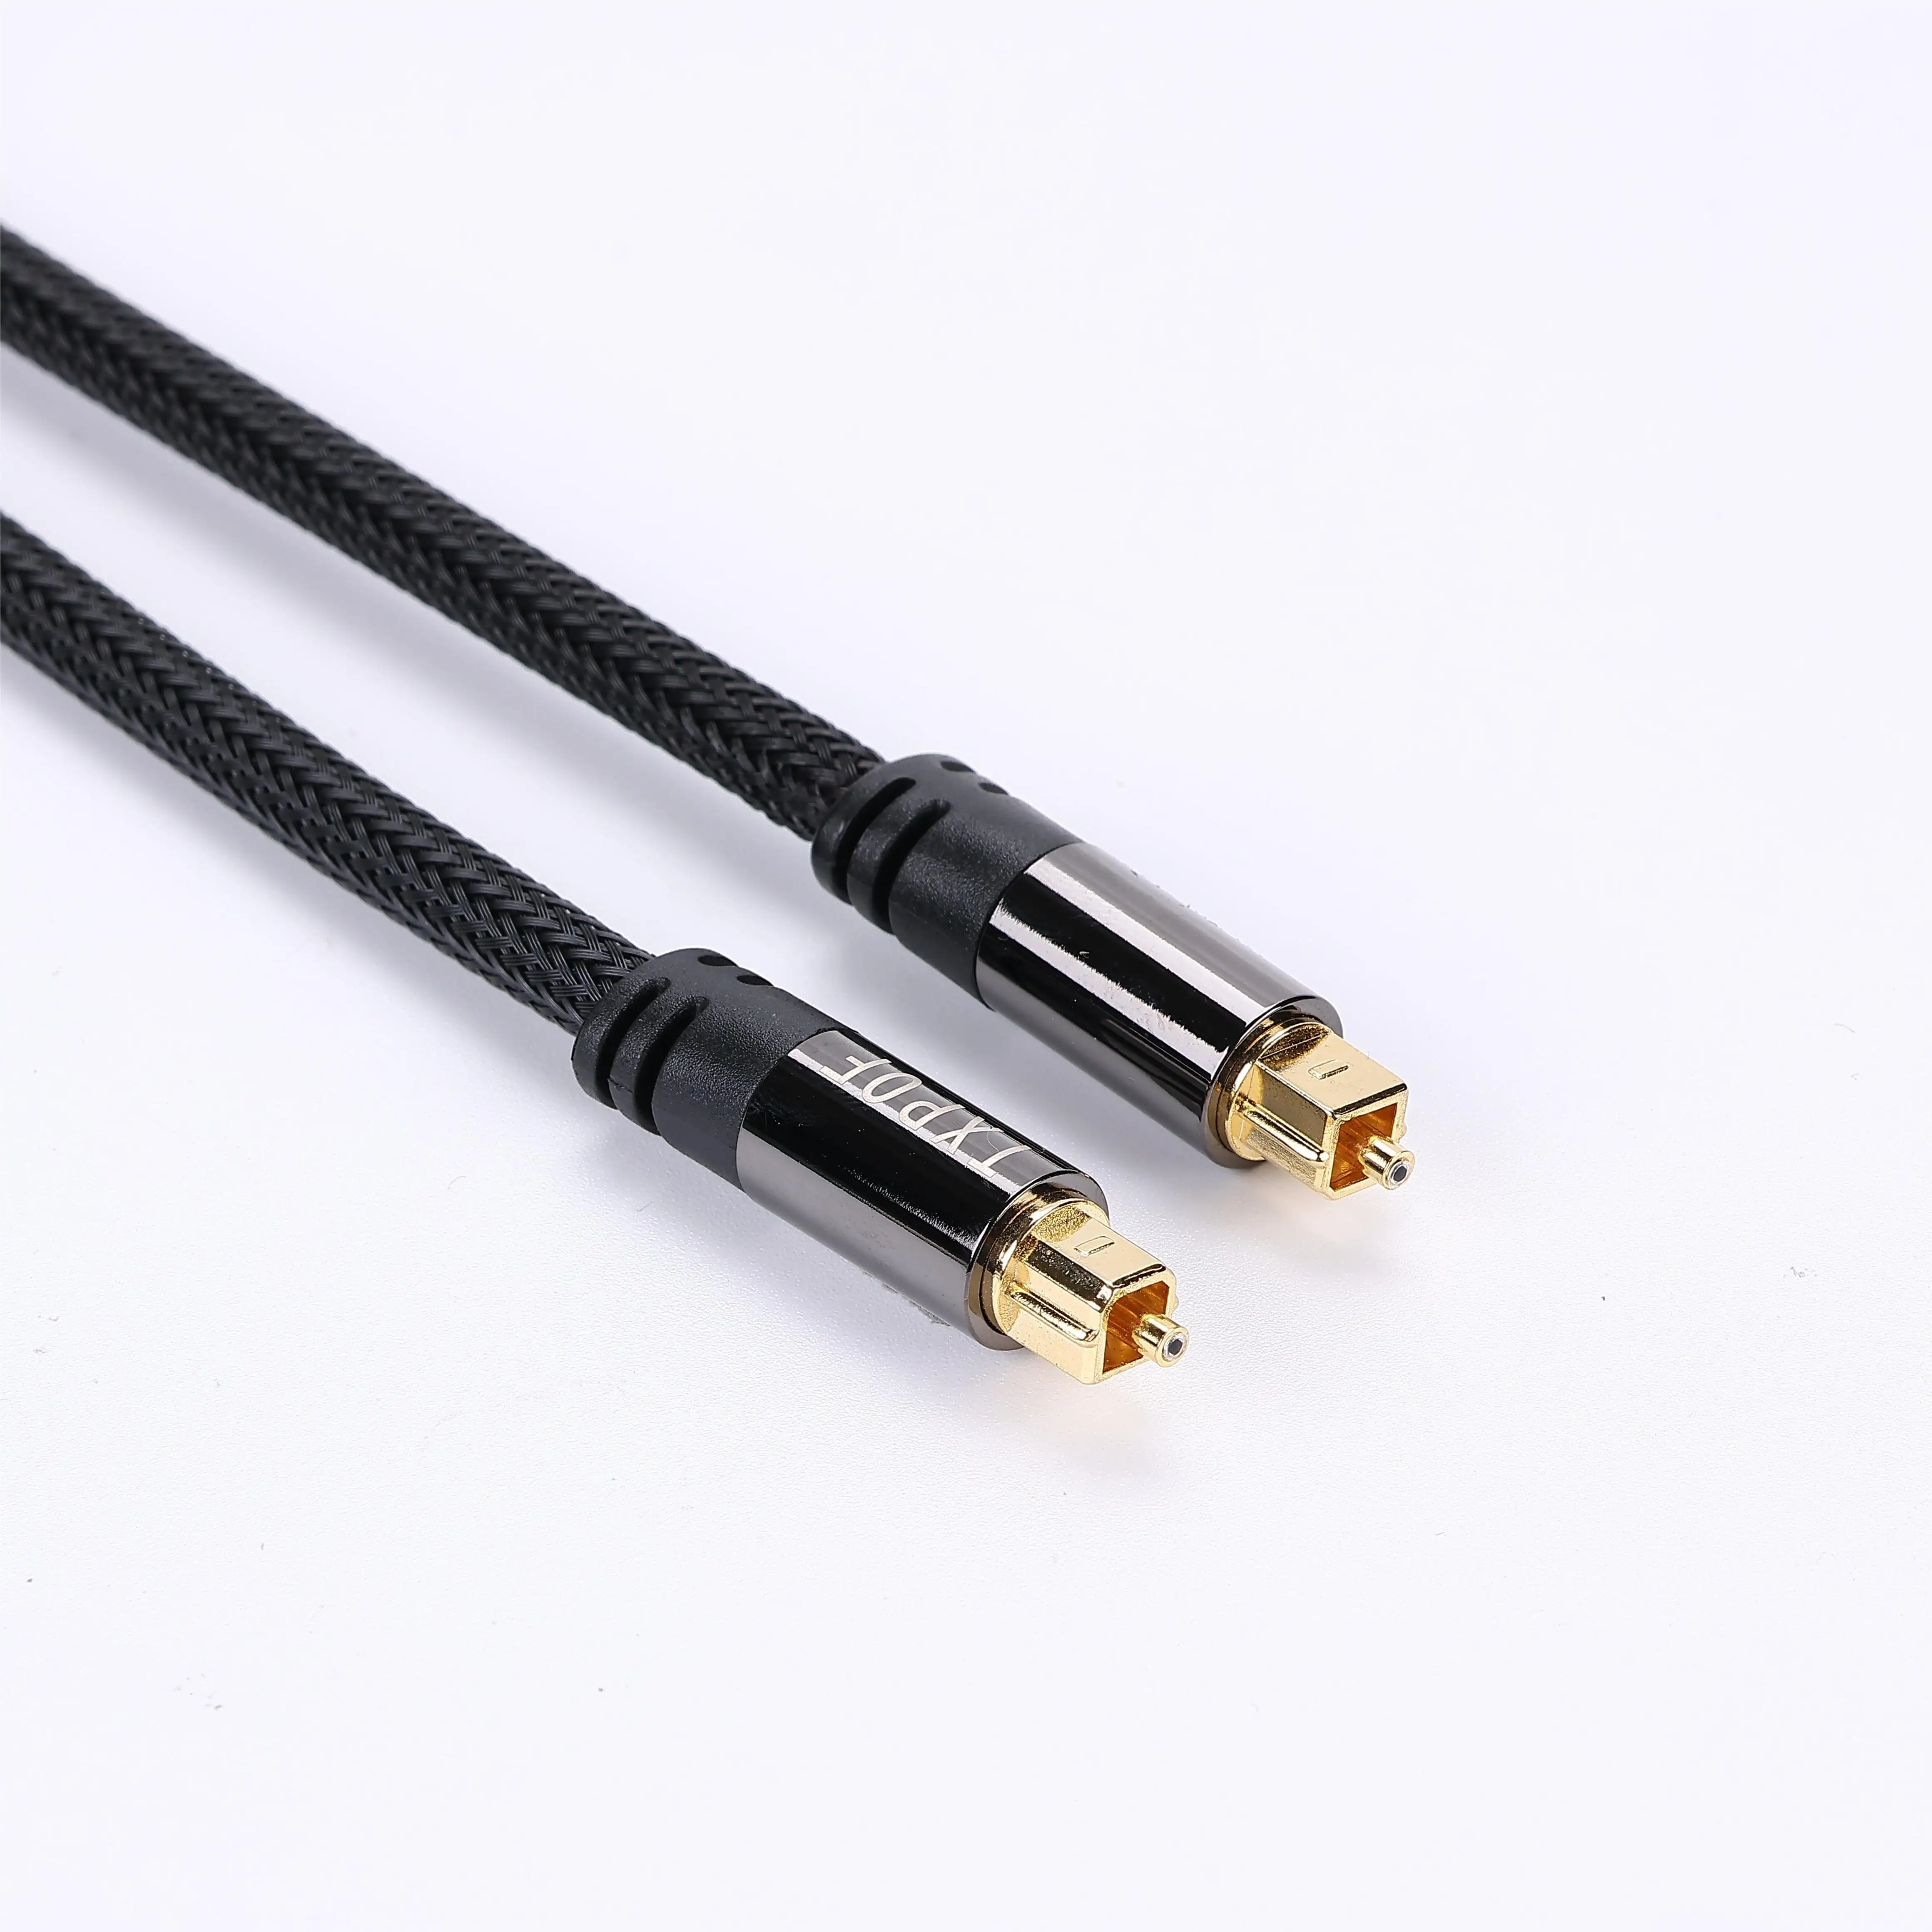 Custom High Quality 0.5M 1M 1.5M 2M 5M 10M Twisted Converter Speaker Hifi Audio OFC Cable Rca Digital Coaxial Cable